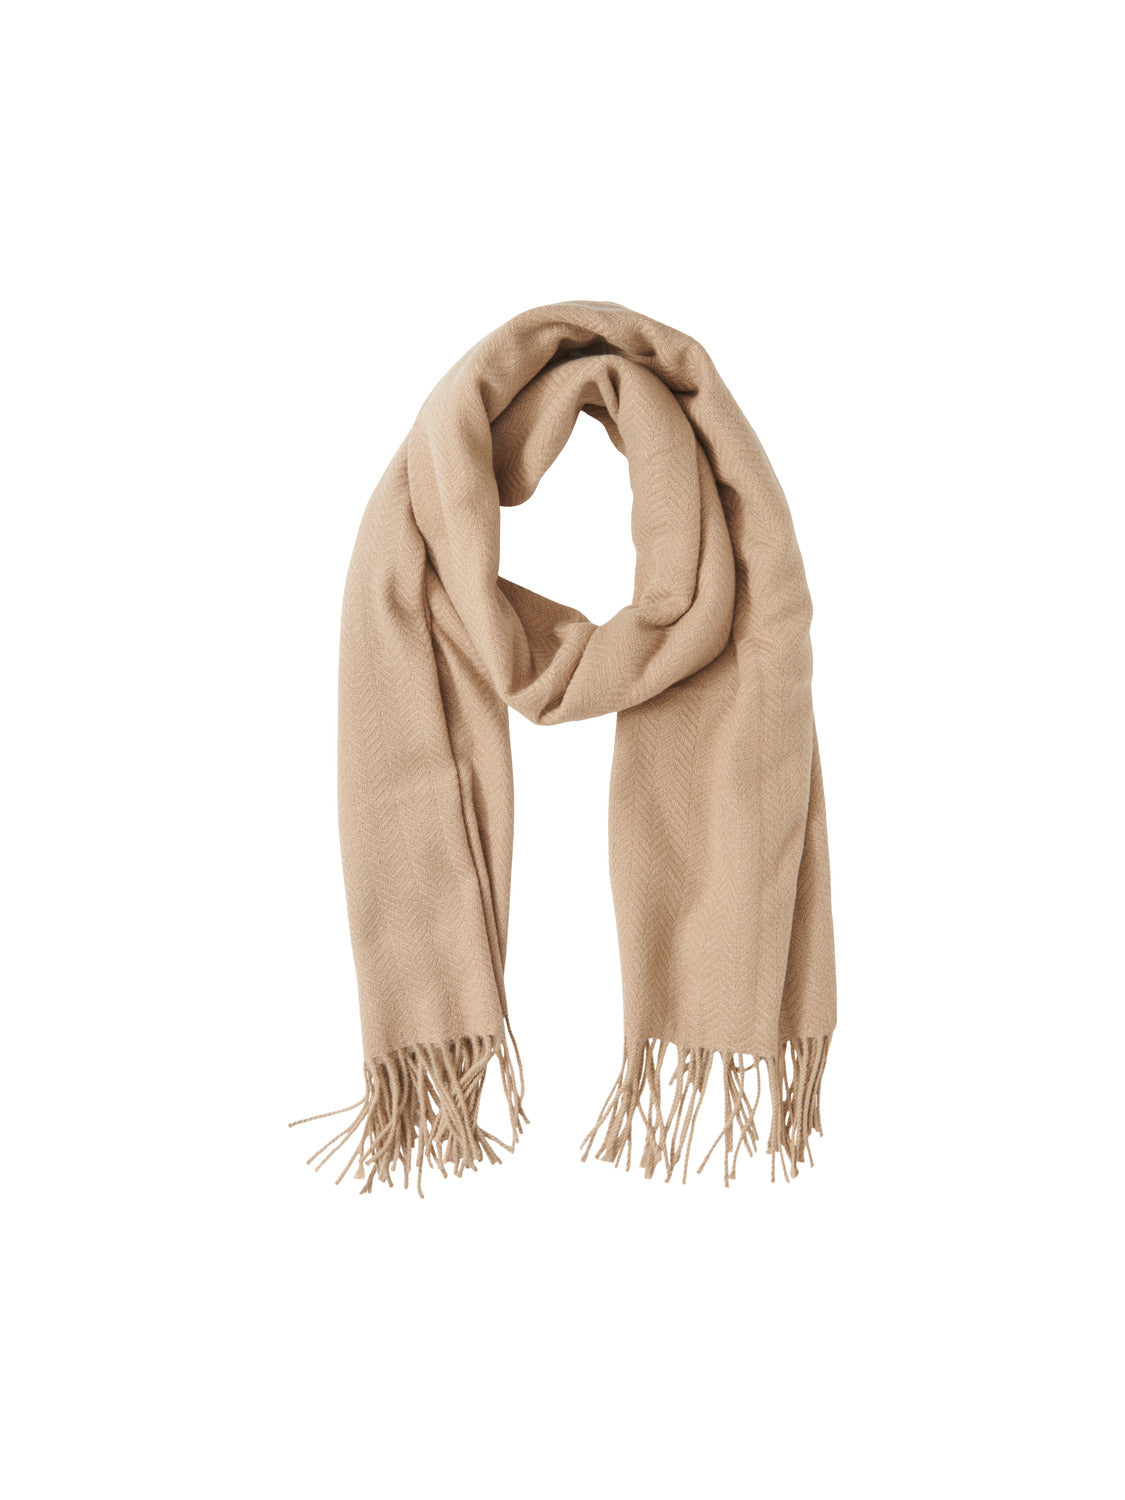 PCKIAL Scarf - Silver Mink